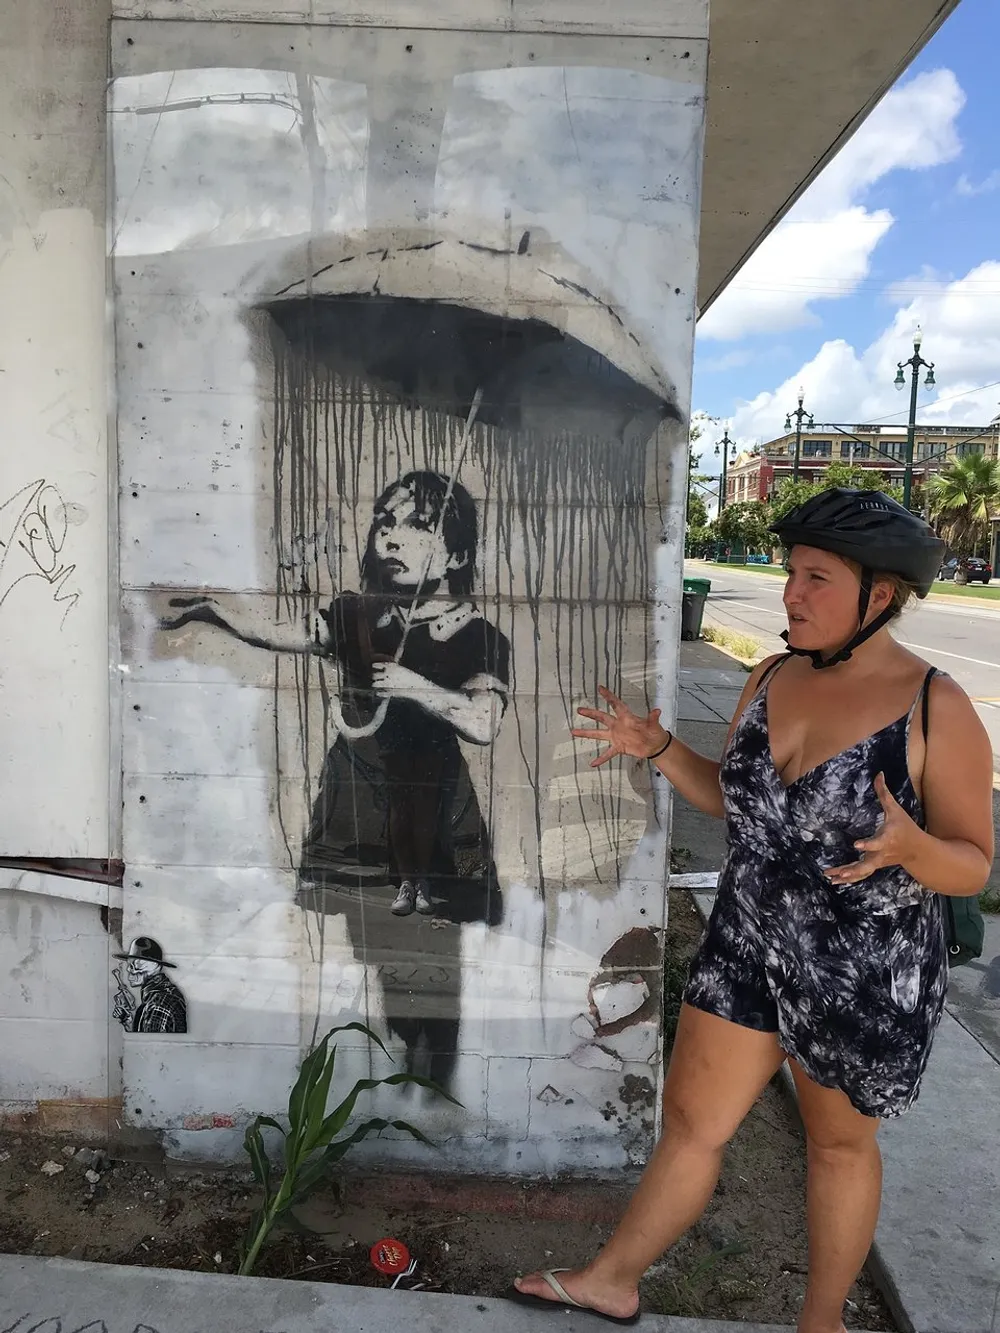 A person wearing a helmet is posing with an expressive gesture next to a street art piece depicting a child reaching out as if interacting with rain